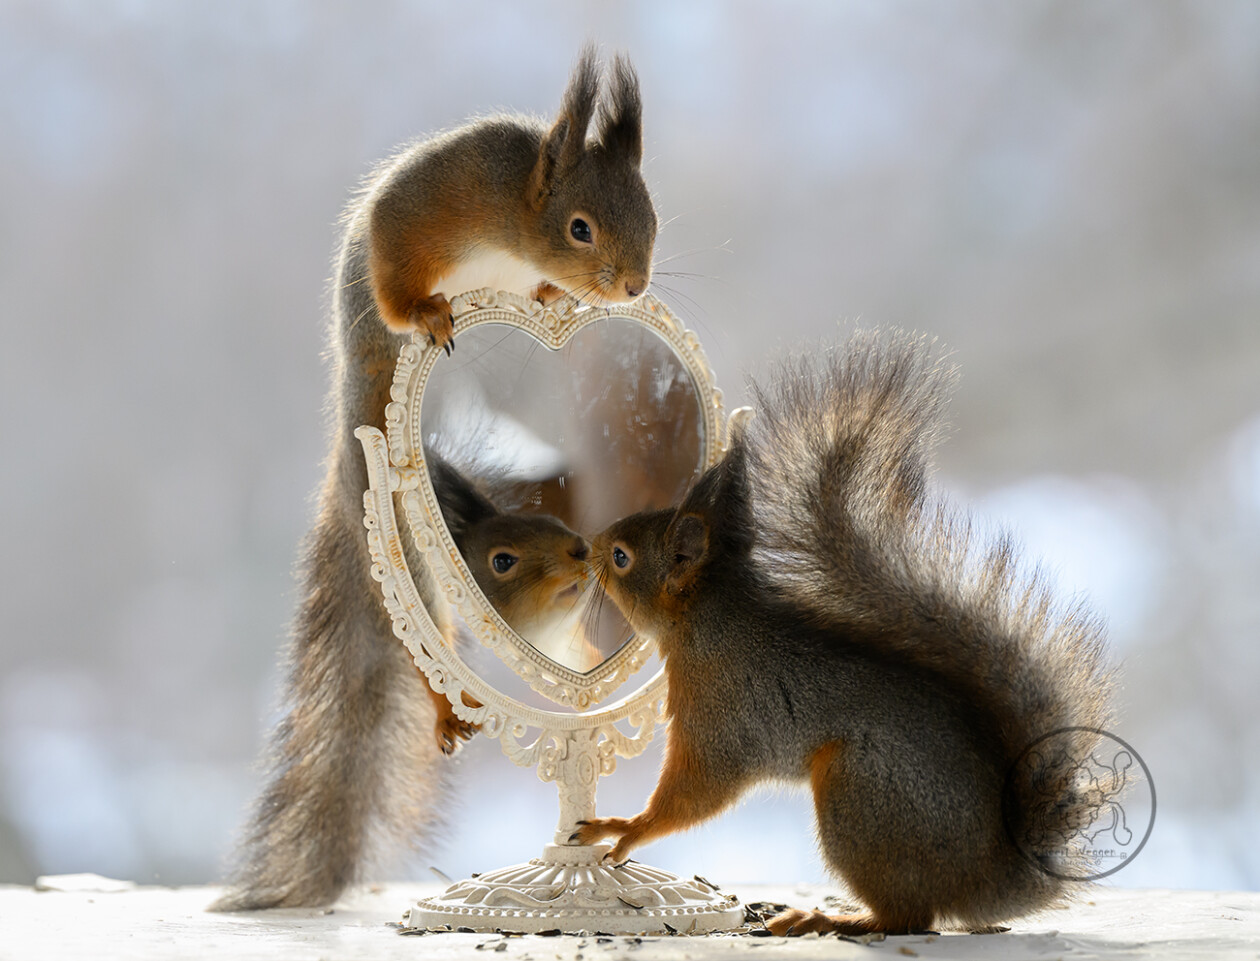 Photographer Geert Weggen Captured Lovely And Playful Pictures Of Squirrels In Action (14)